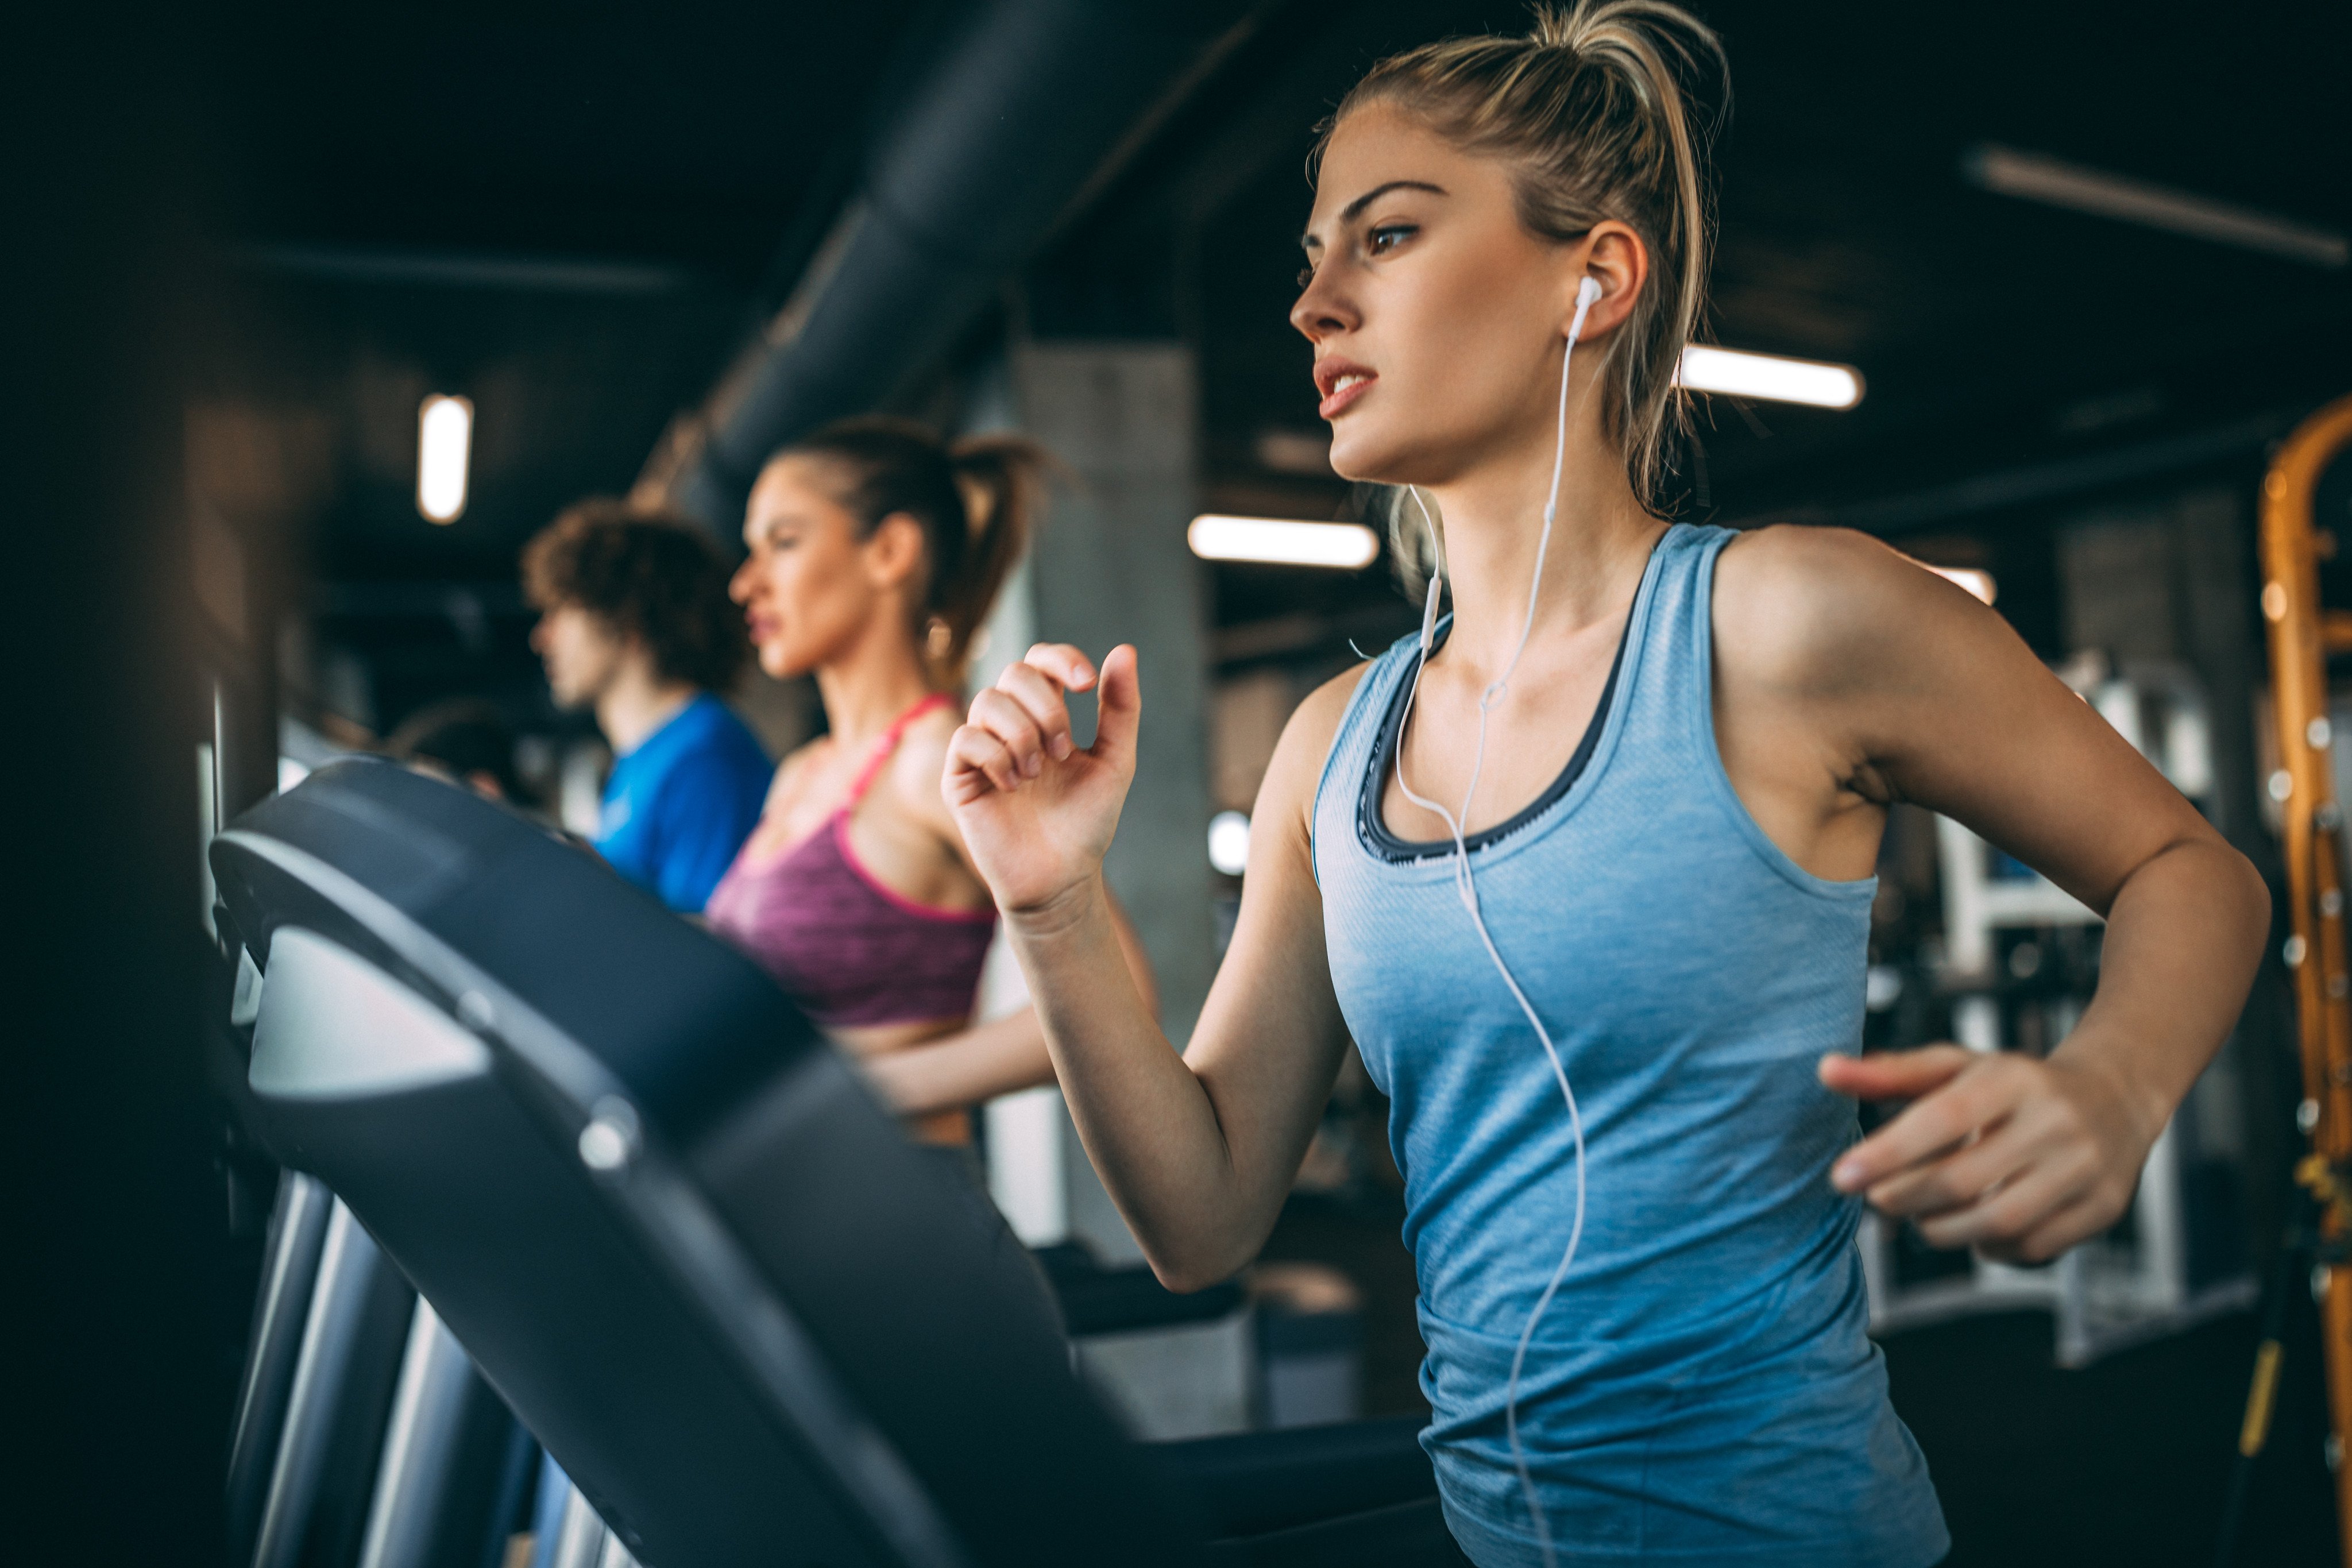 Wearing make-up can block pores through which sweat escapes, a study of college students running on treadmills finds. Photo: Shutterstock